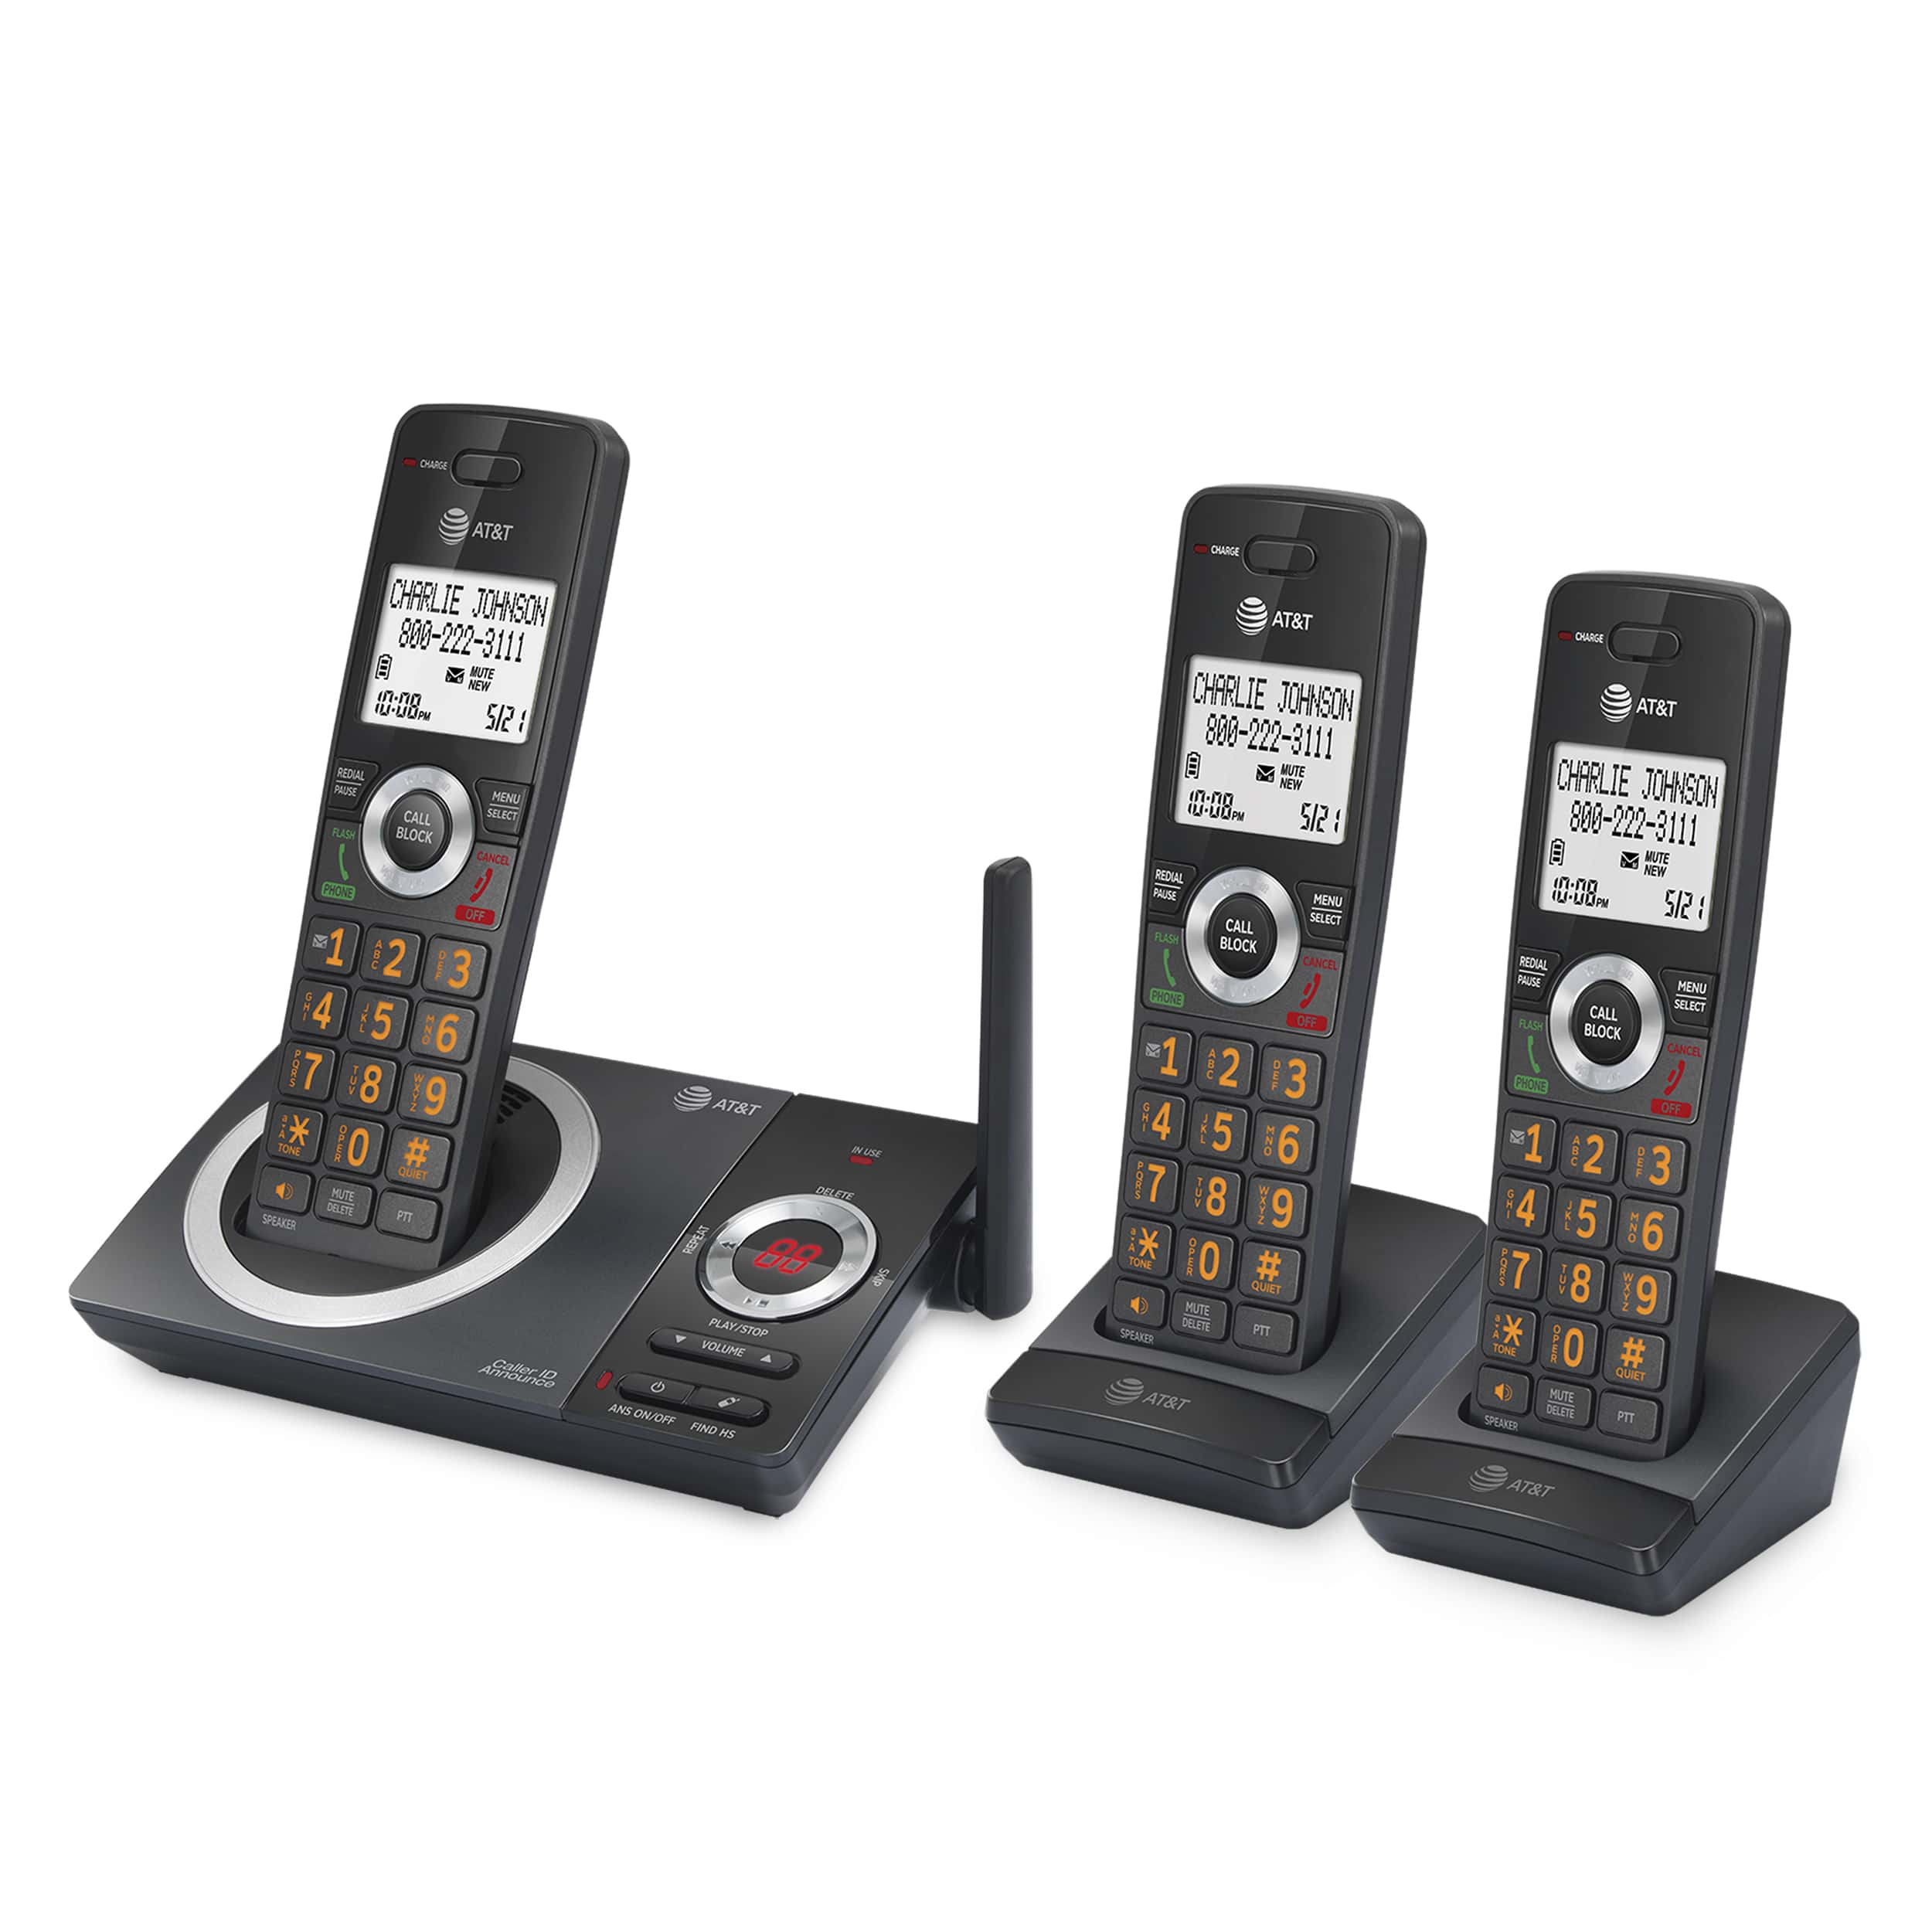 3-Handset Expandable Cordless Phone with Unsurpassed Range, Smart Call Blocker and Answering System - view 3